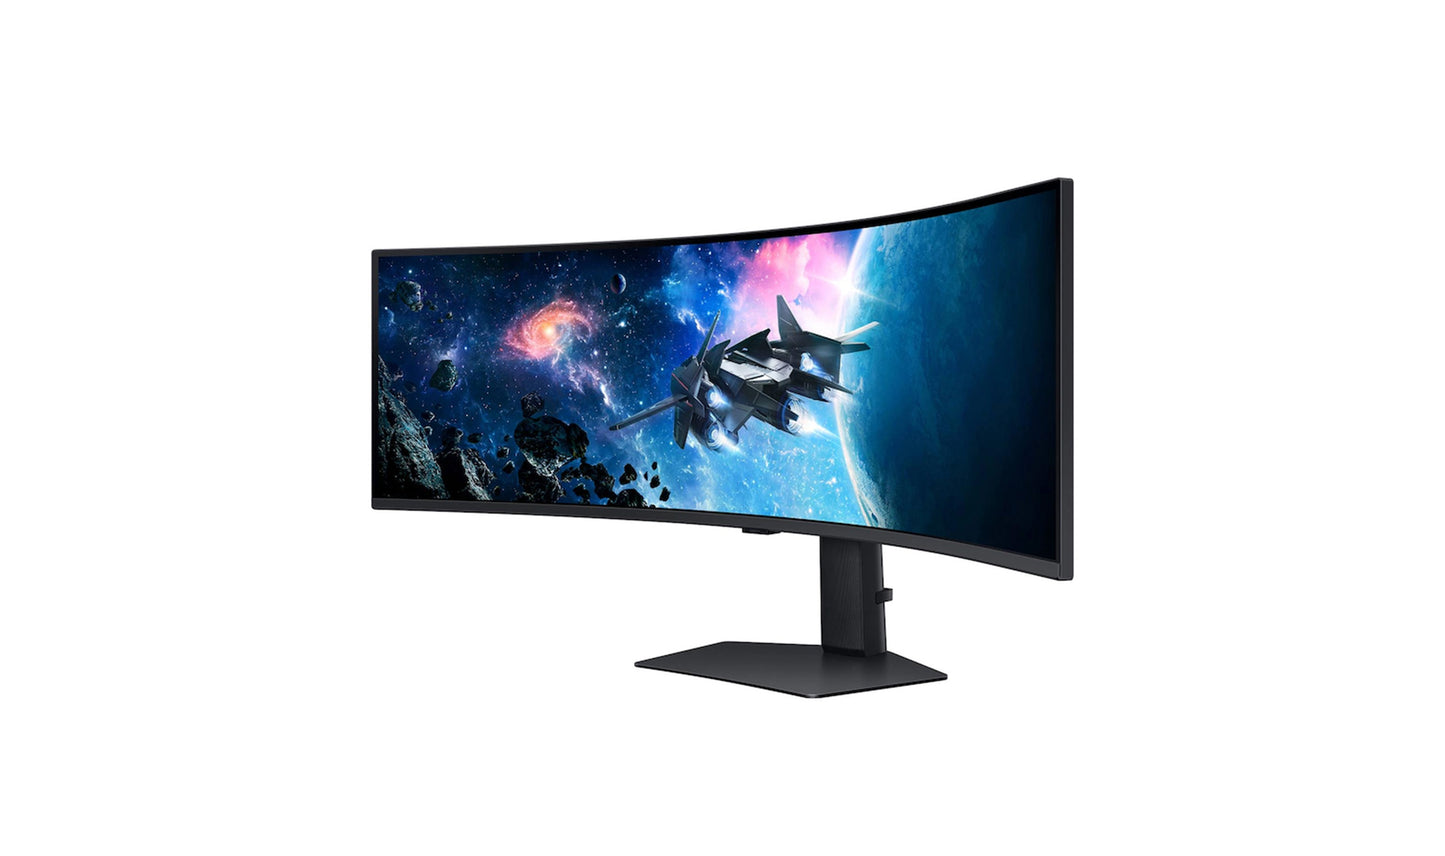 49" Odyssey G9 G95C DQHD 240Hz 1ms(GtG) DisplayHDR 1000 Curved Gaming Monitor